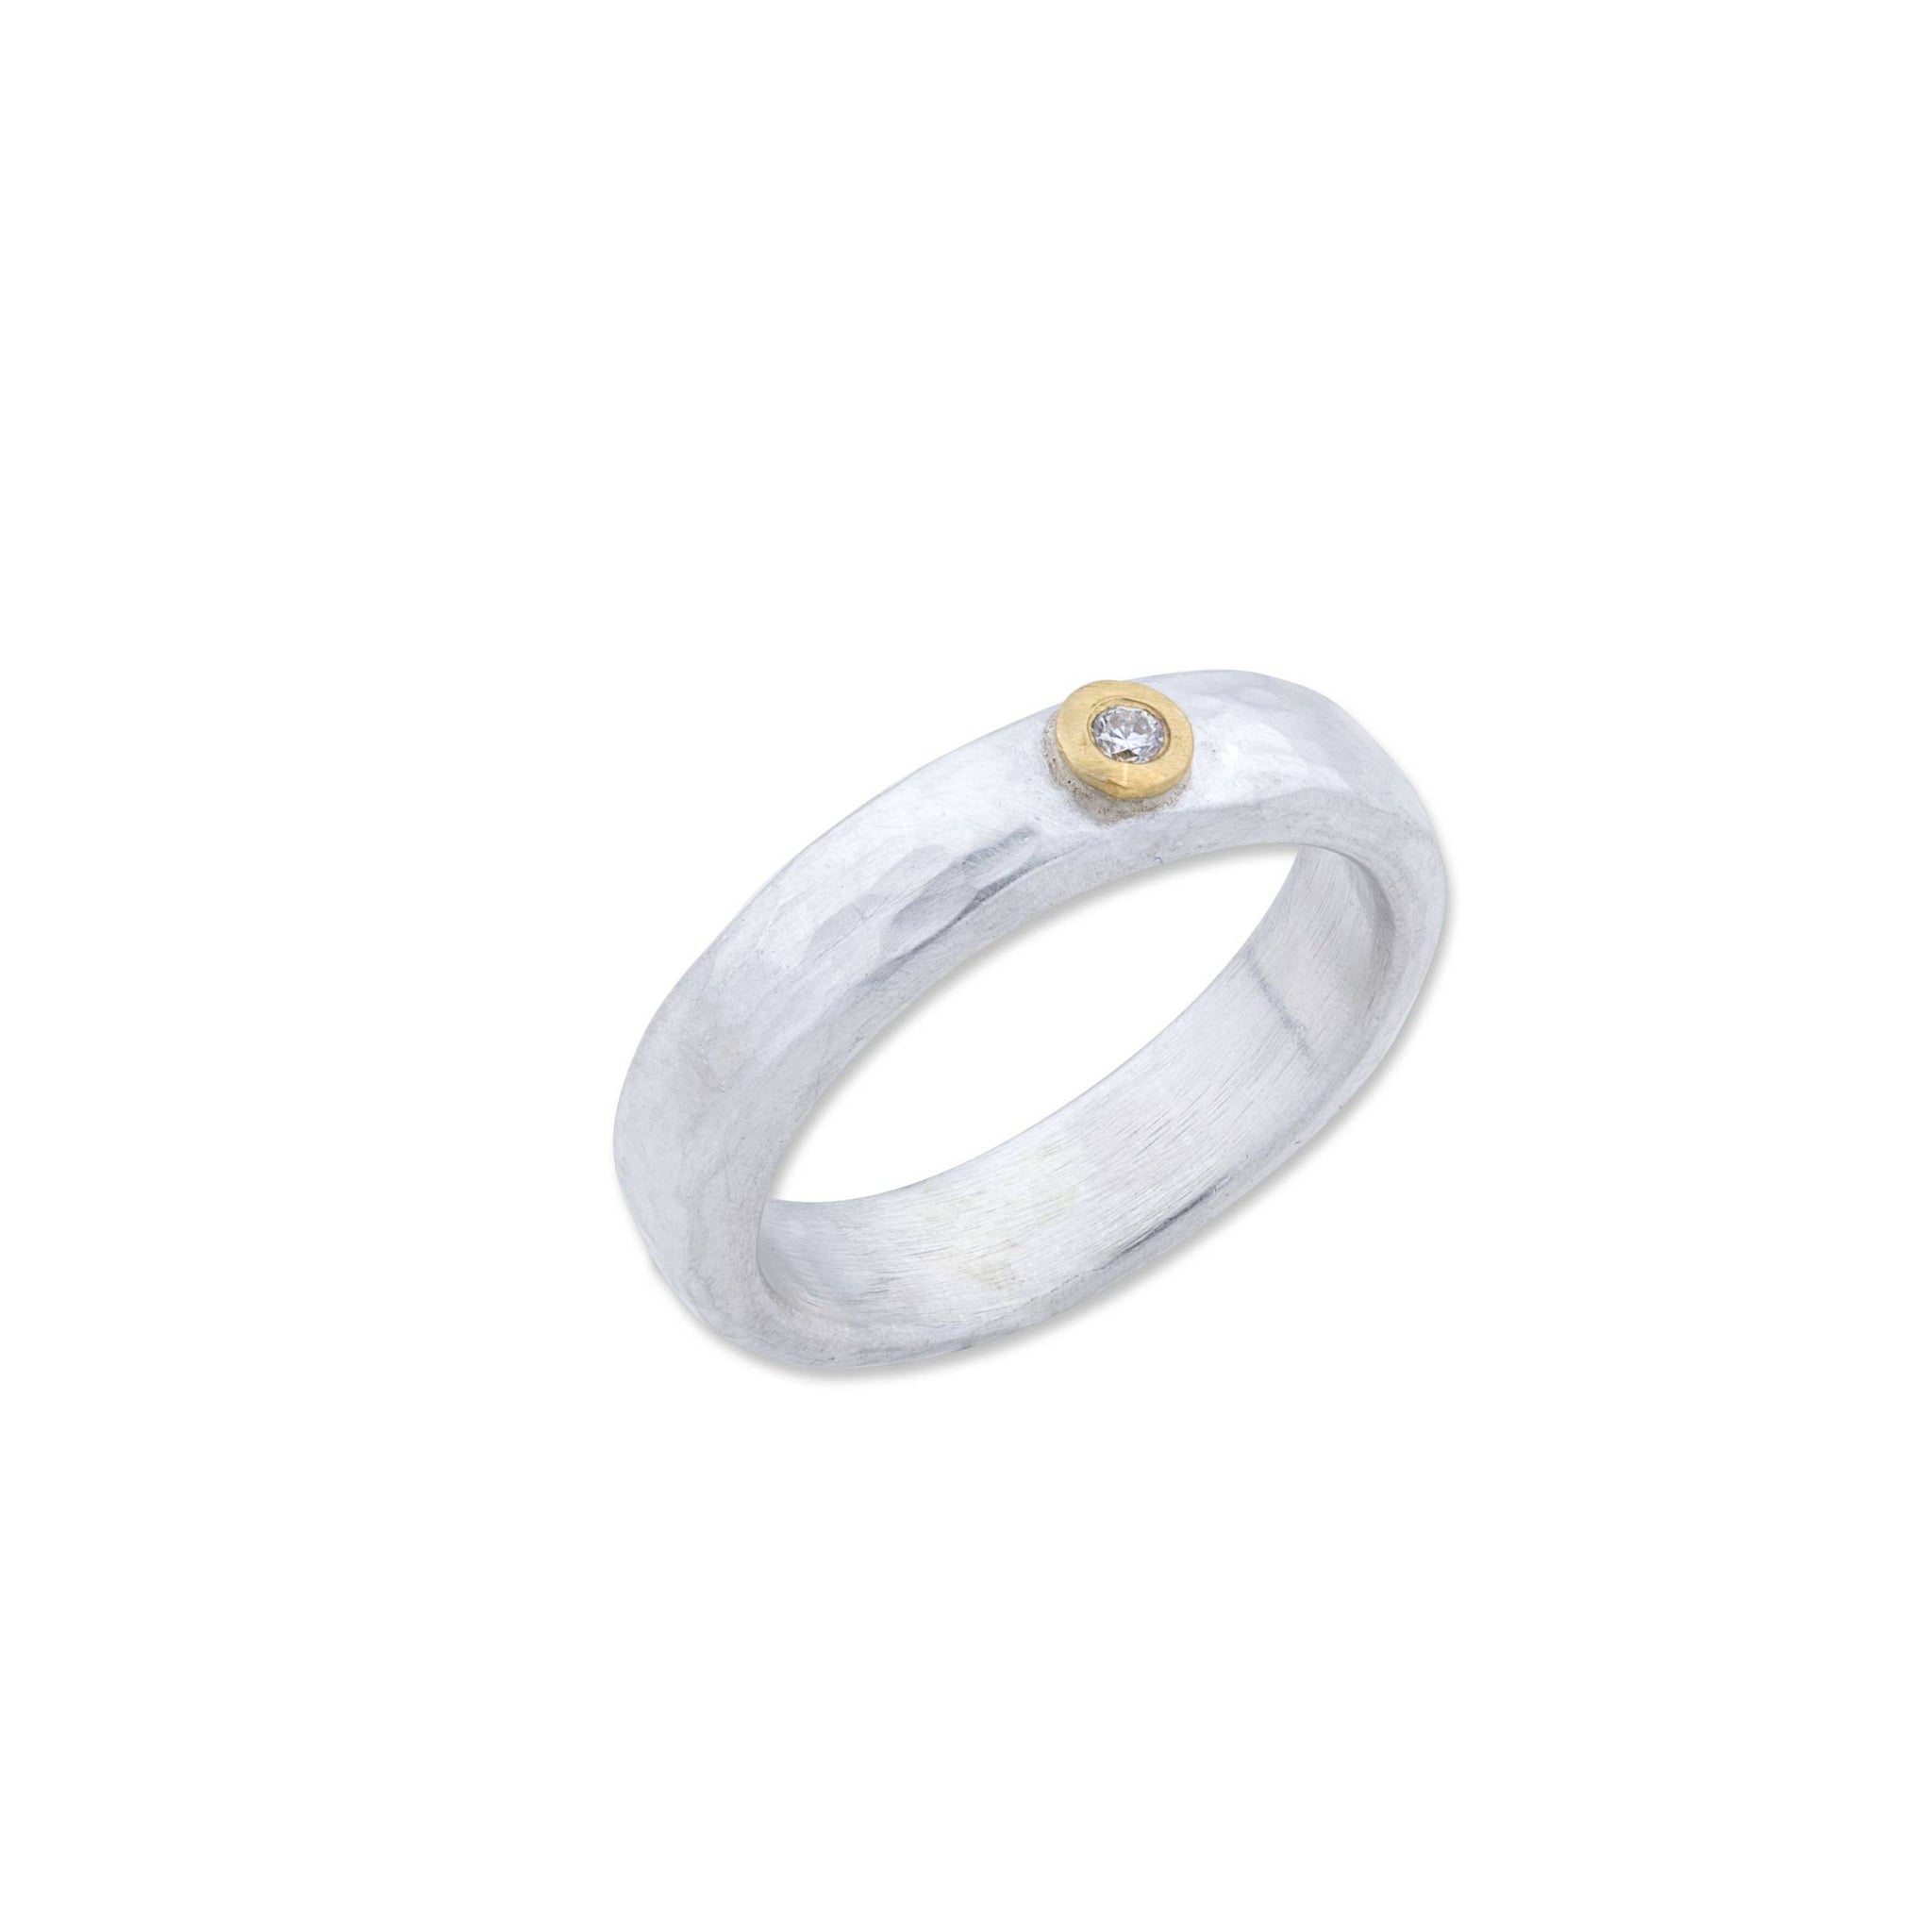 Sterling Silver and 24K Yellow Gold Ring